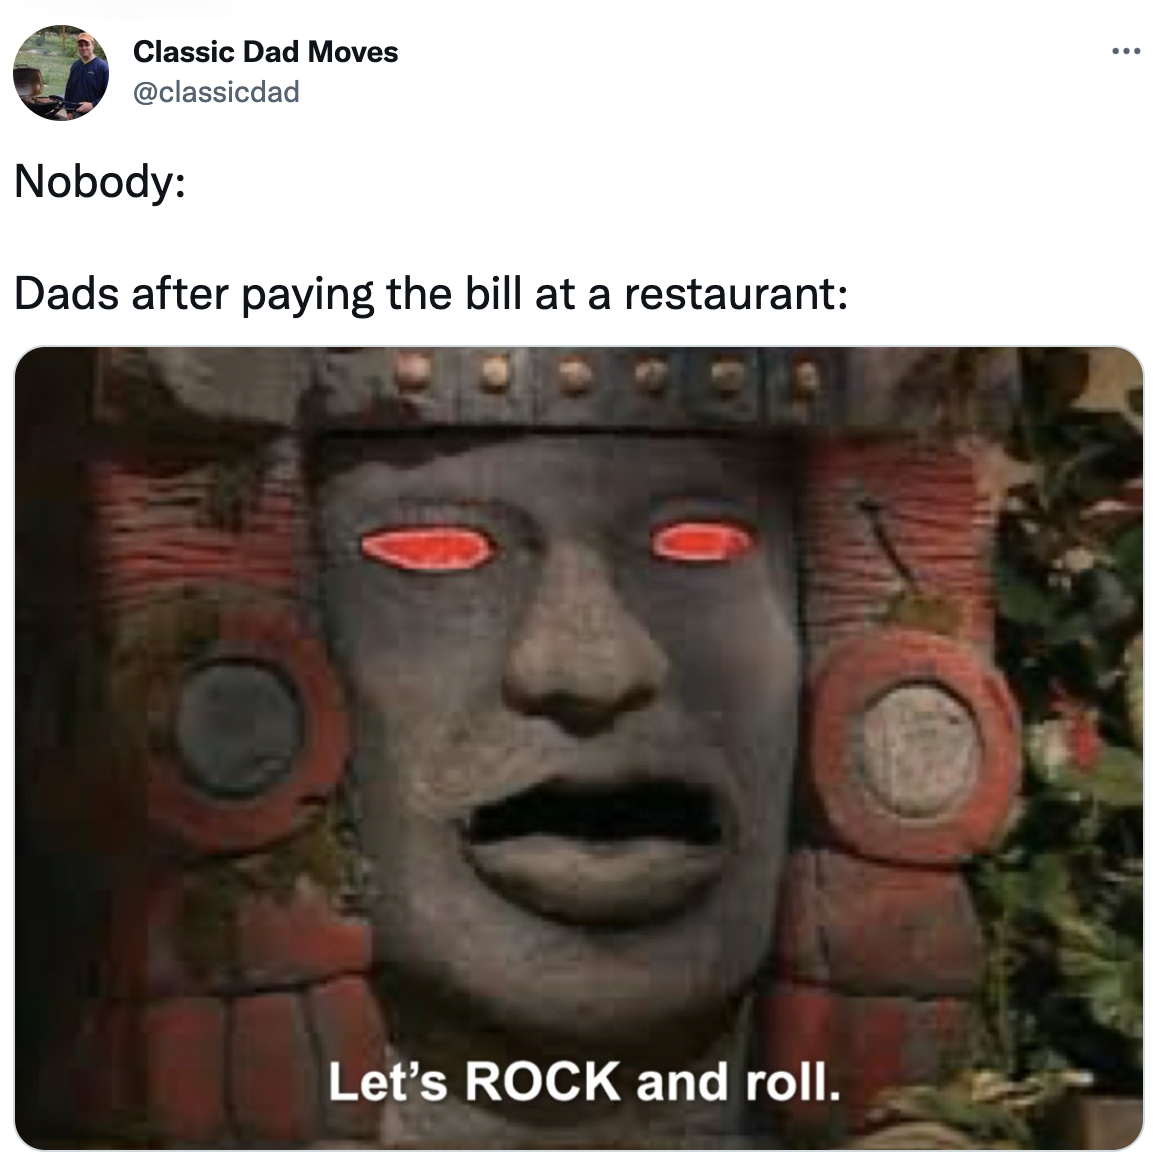 Dank Dad Memes - olmec legends of the hidden temple voice - Classic Dad Moves Nobody Dads after paying the bill at a restaurant Let's Rock and roll.